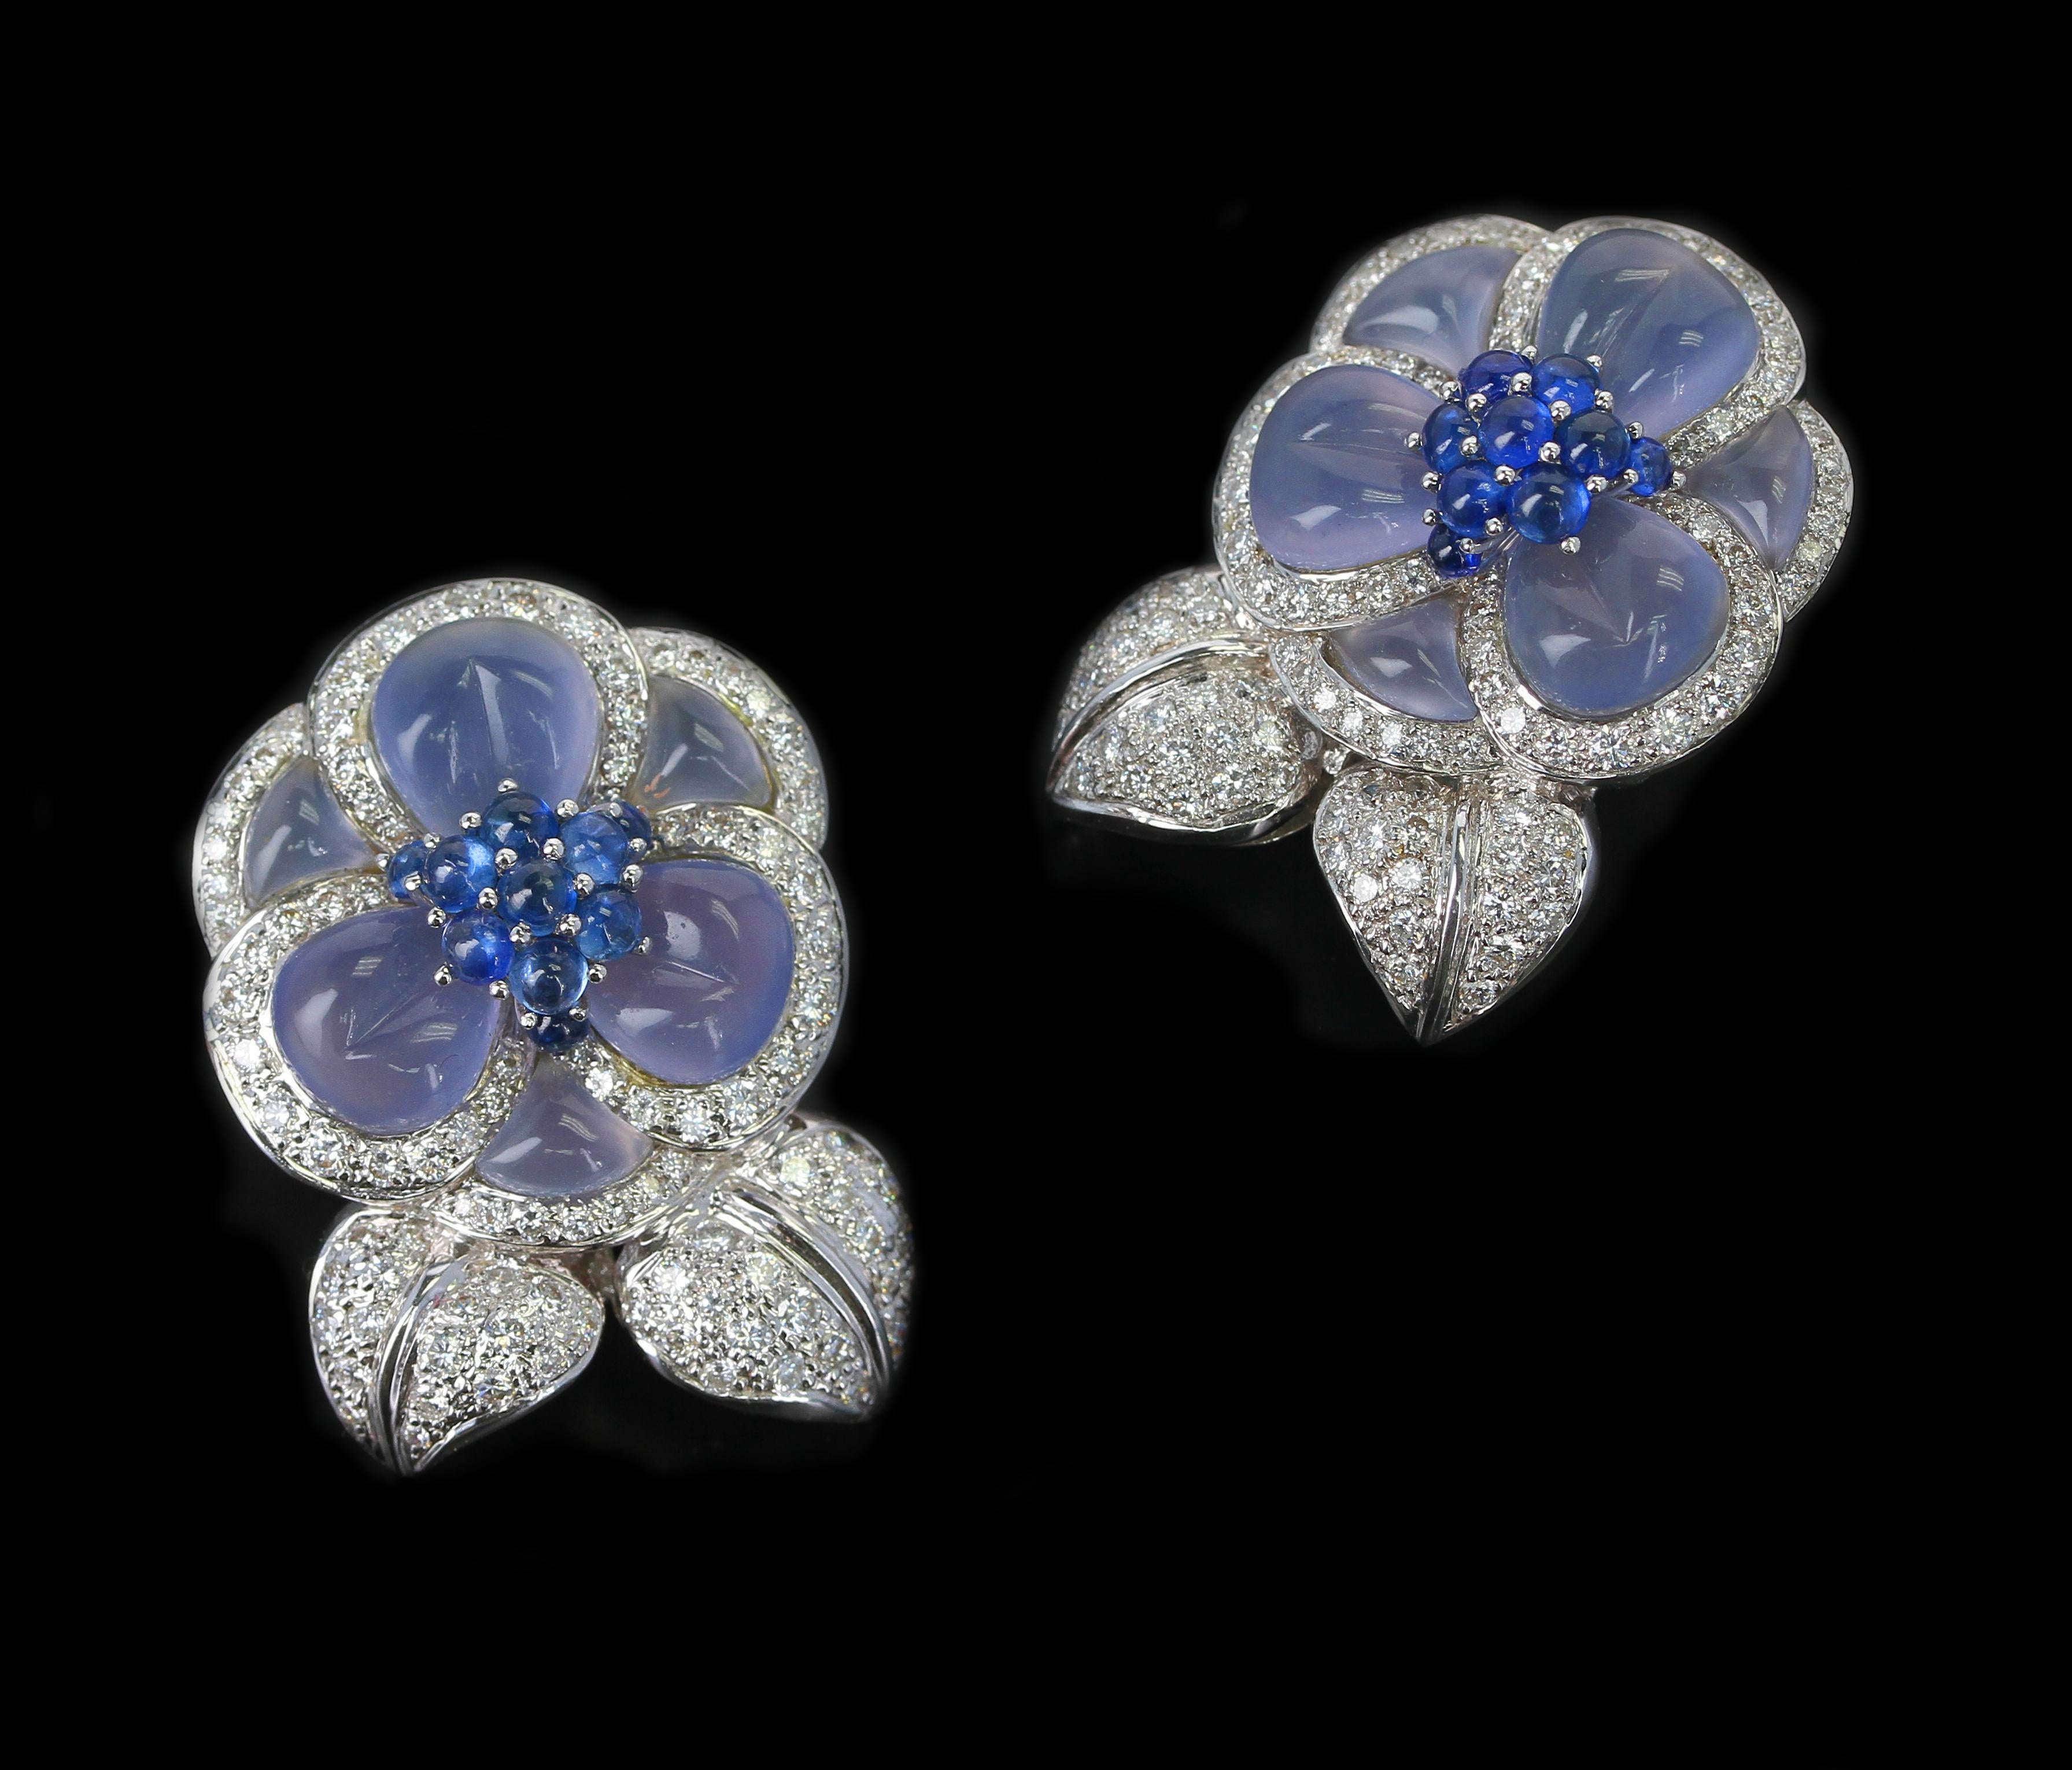 Women's or Men's Carved Chalcedony Floral Earrings with Diamonds and Sapphires, White Gold